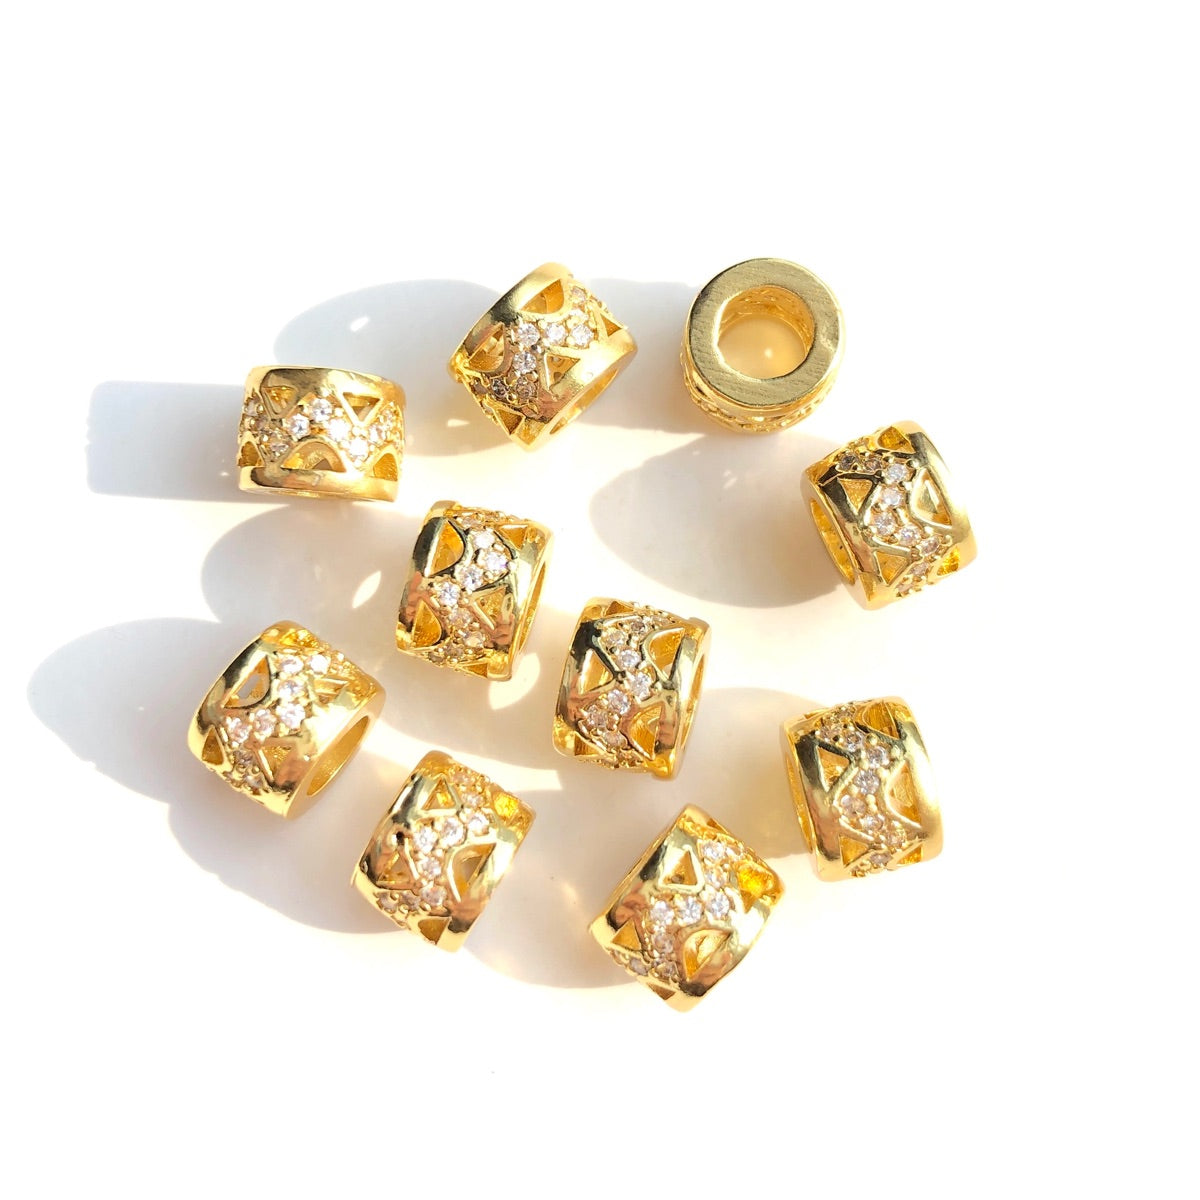 10-20-50pcs/lot 8mm CZ Paved Big Hole Hollow Rondelle Wheel Spacers Gold CZ Paved Spacers Big Hole Beads New Spacers Arrivals Rondelle Beads Wholesale Charms Beads Beyond